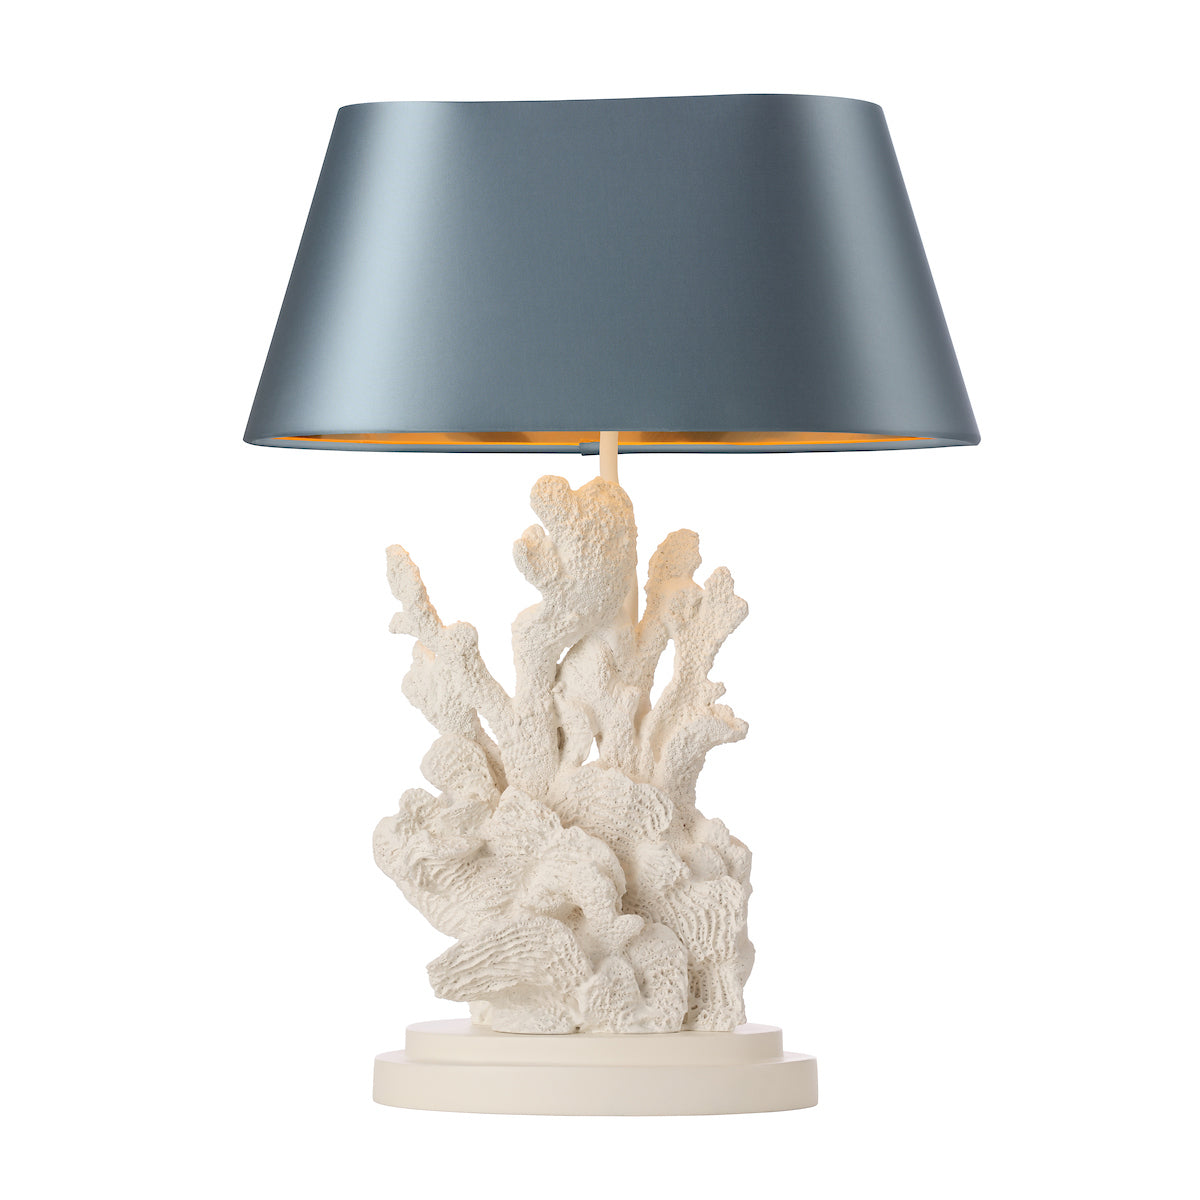 Korallion chalk white table lamp by David Hunt Lighting shown with Lexington shade in airforce blue satin